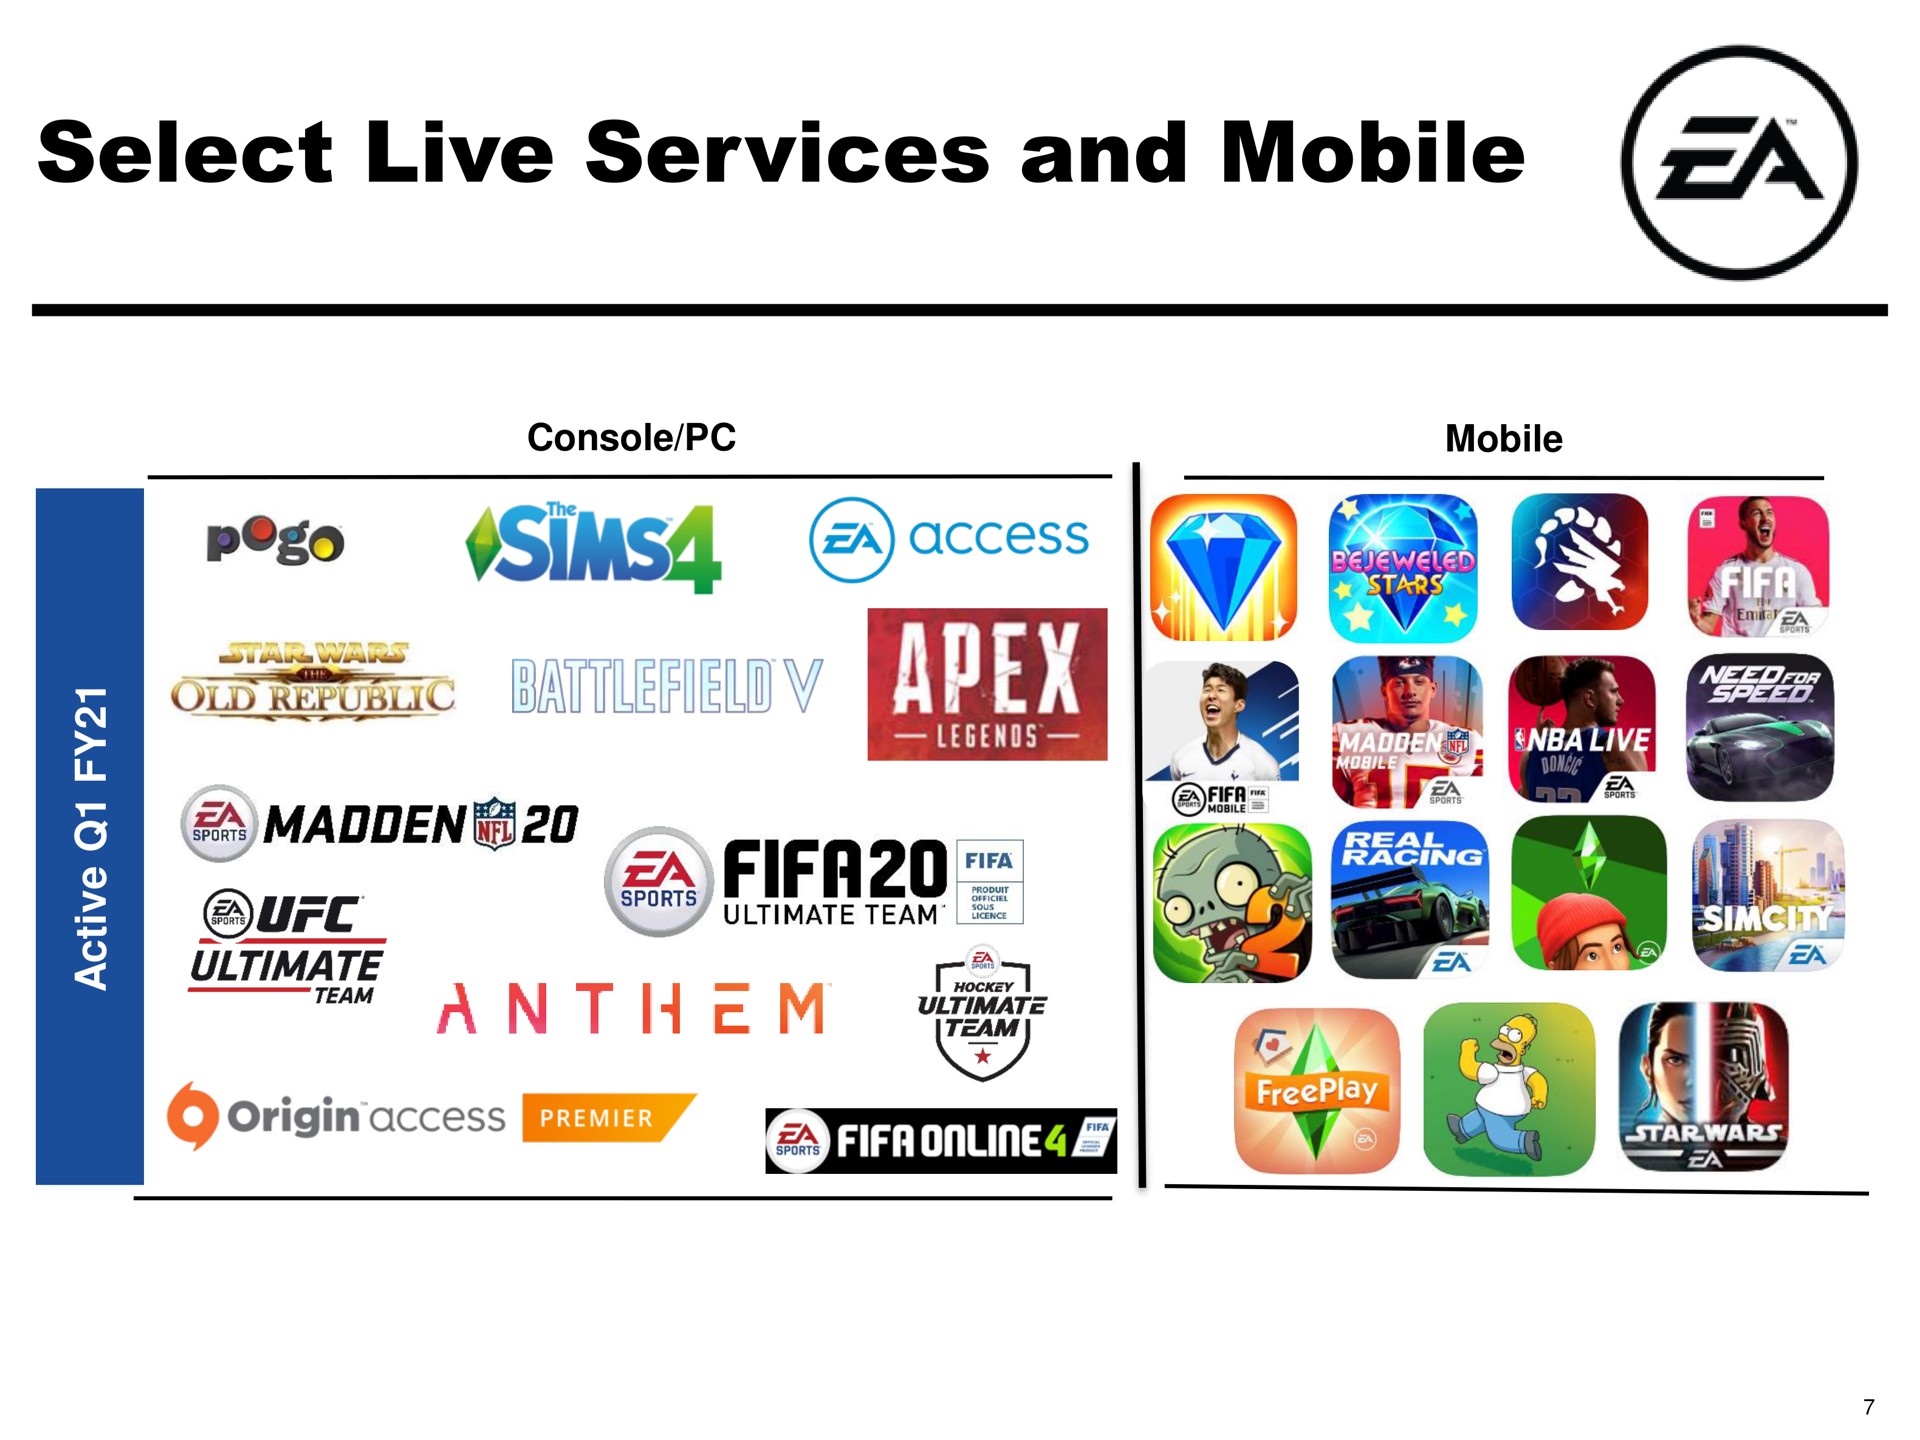 select live services and mobile access a wove origin access | Electronic Arts